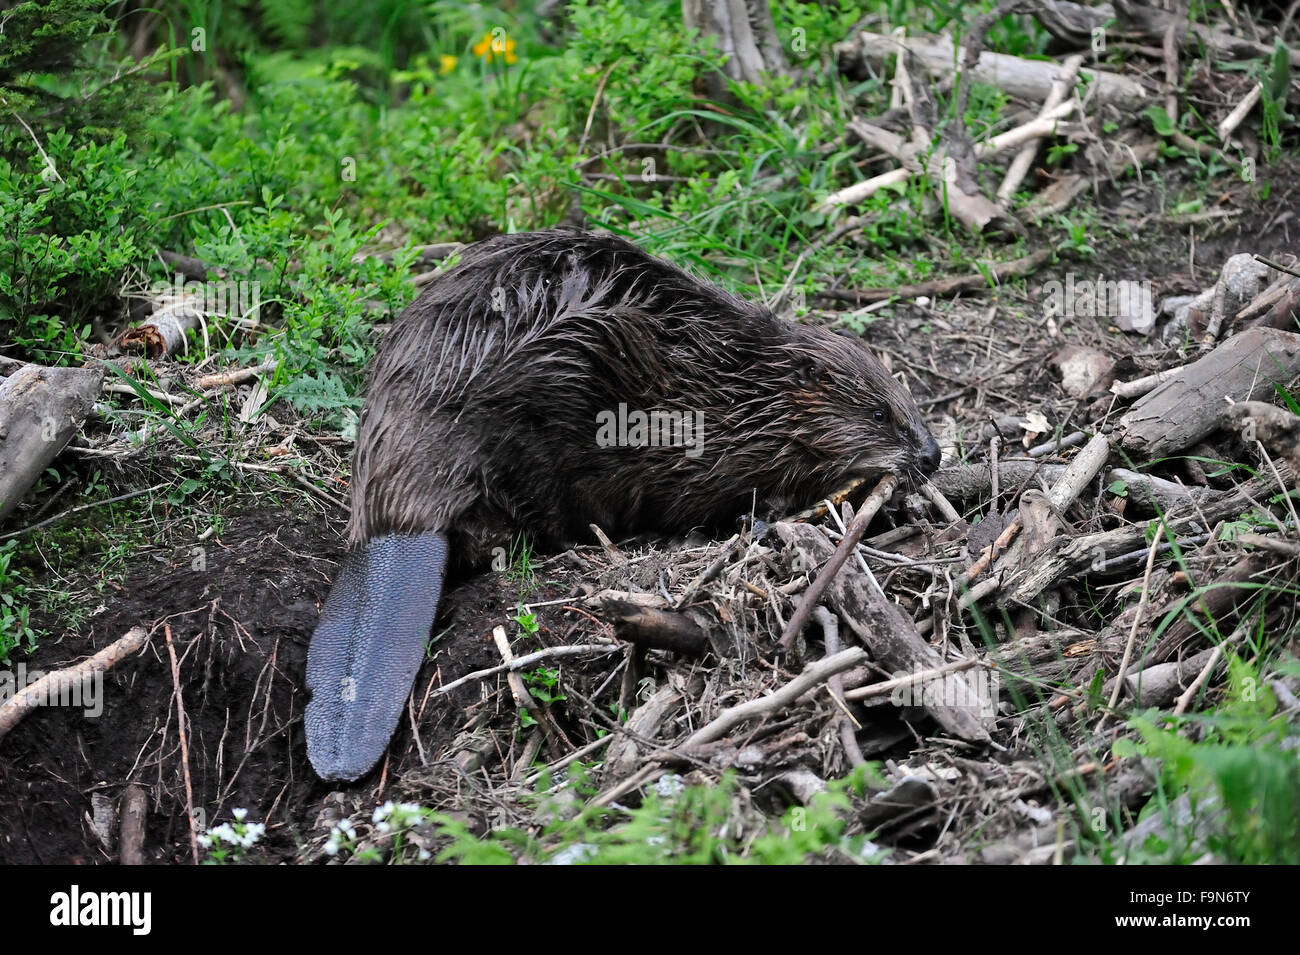 Eurasian beaver / European beaver (Castor fiber) on land collecting twigs and branches for food and dam / lodge building Stock Photo